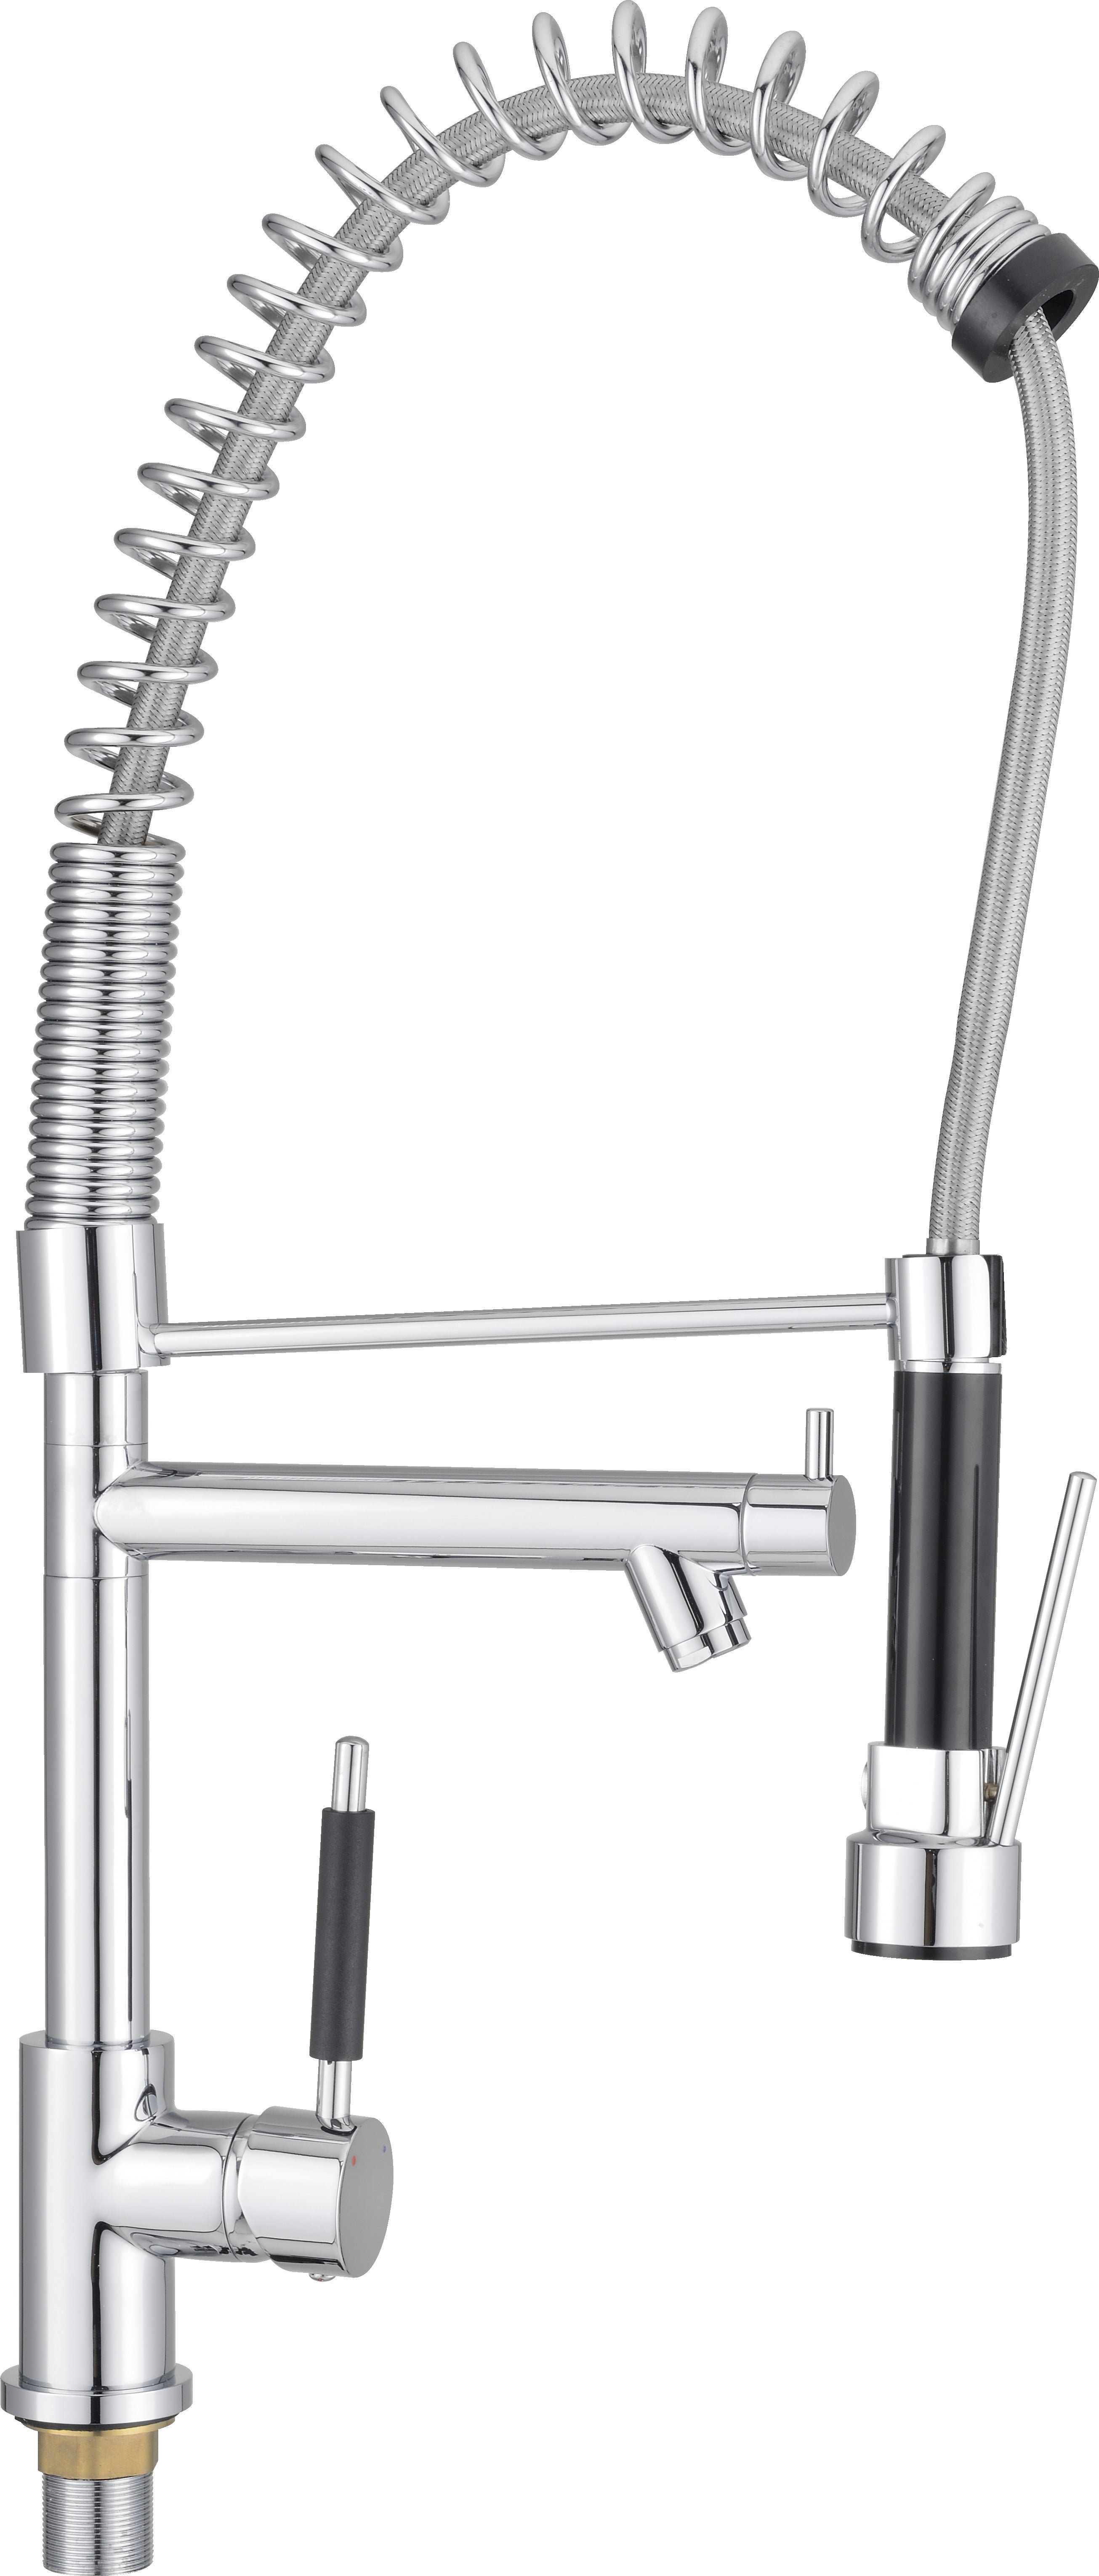 Industrial Premium Pull-out Kitchen Chrome Mixer